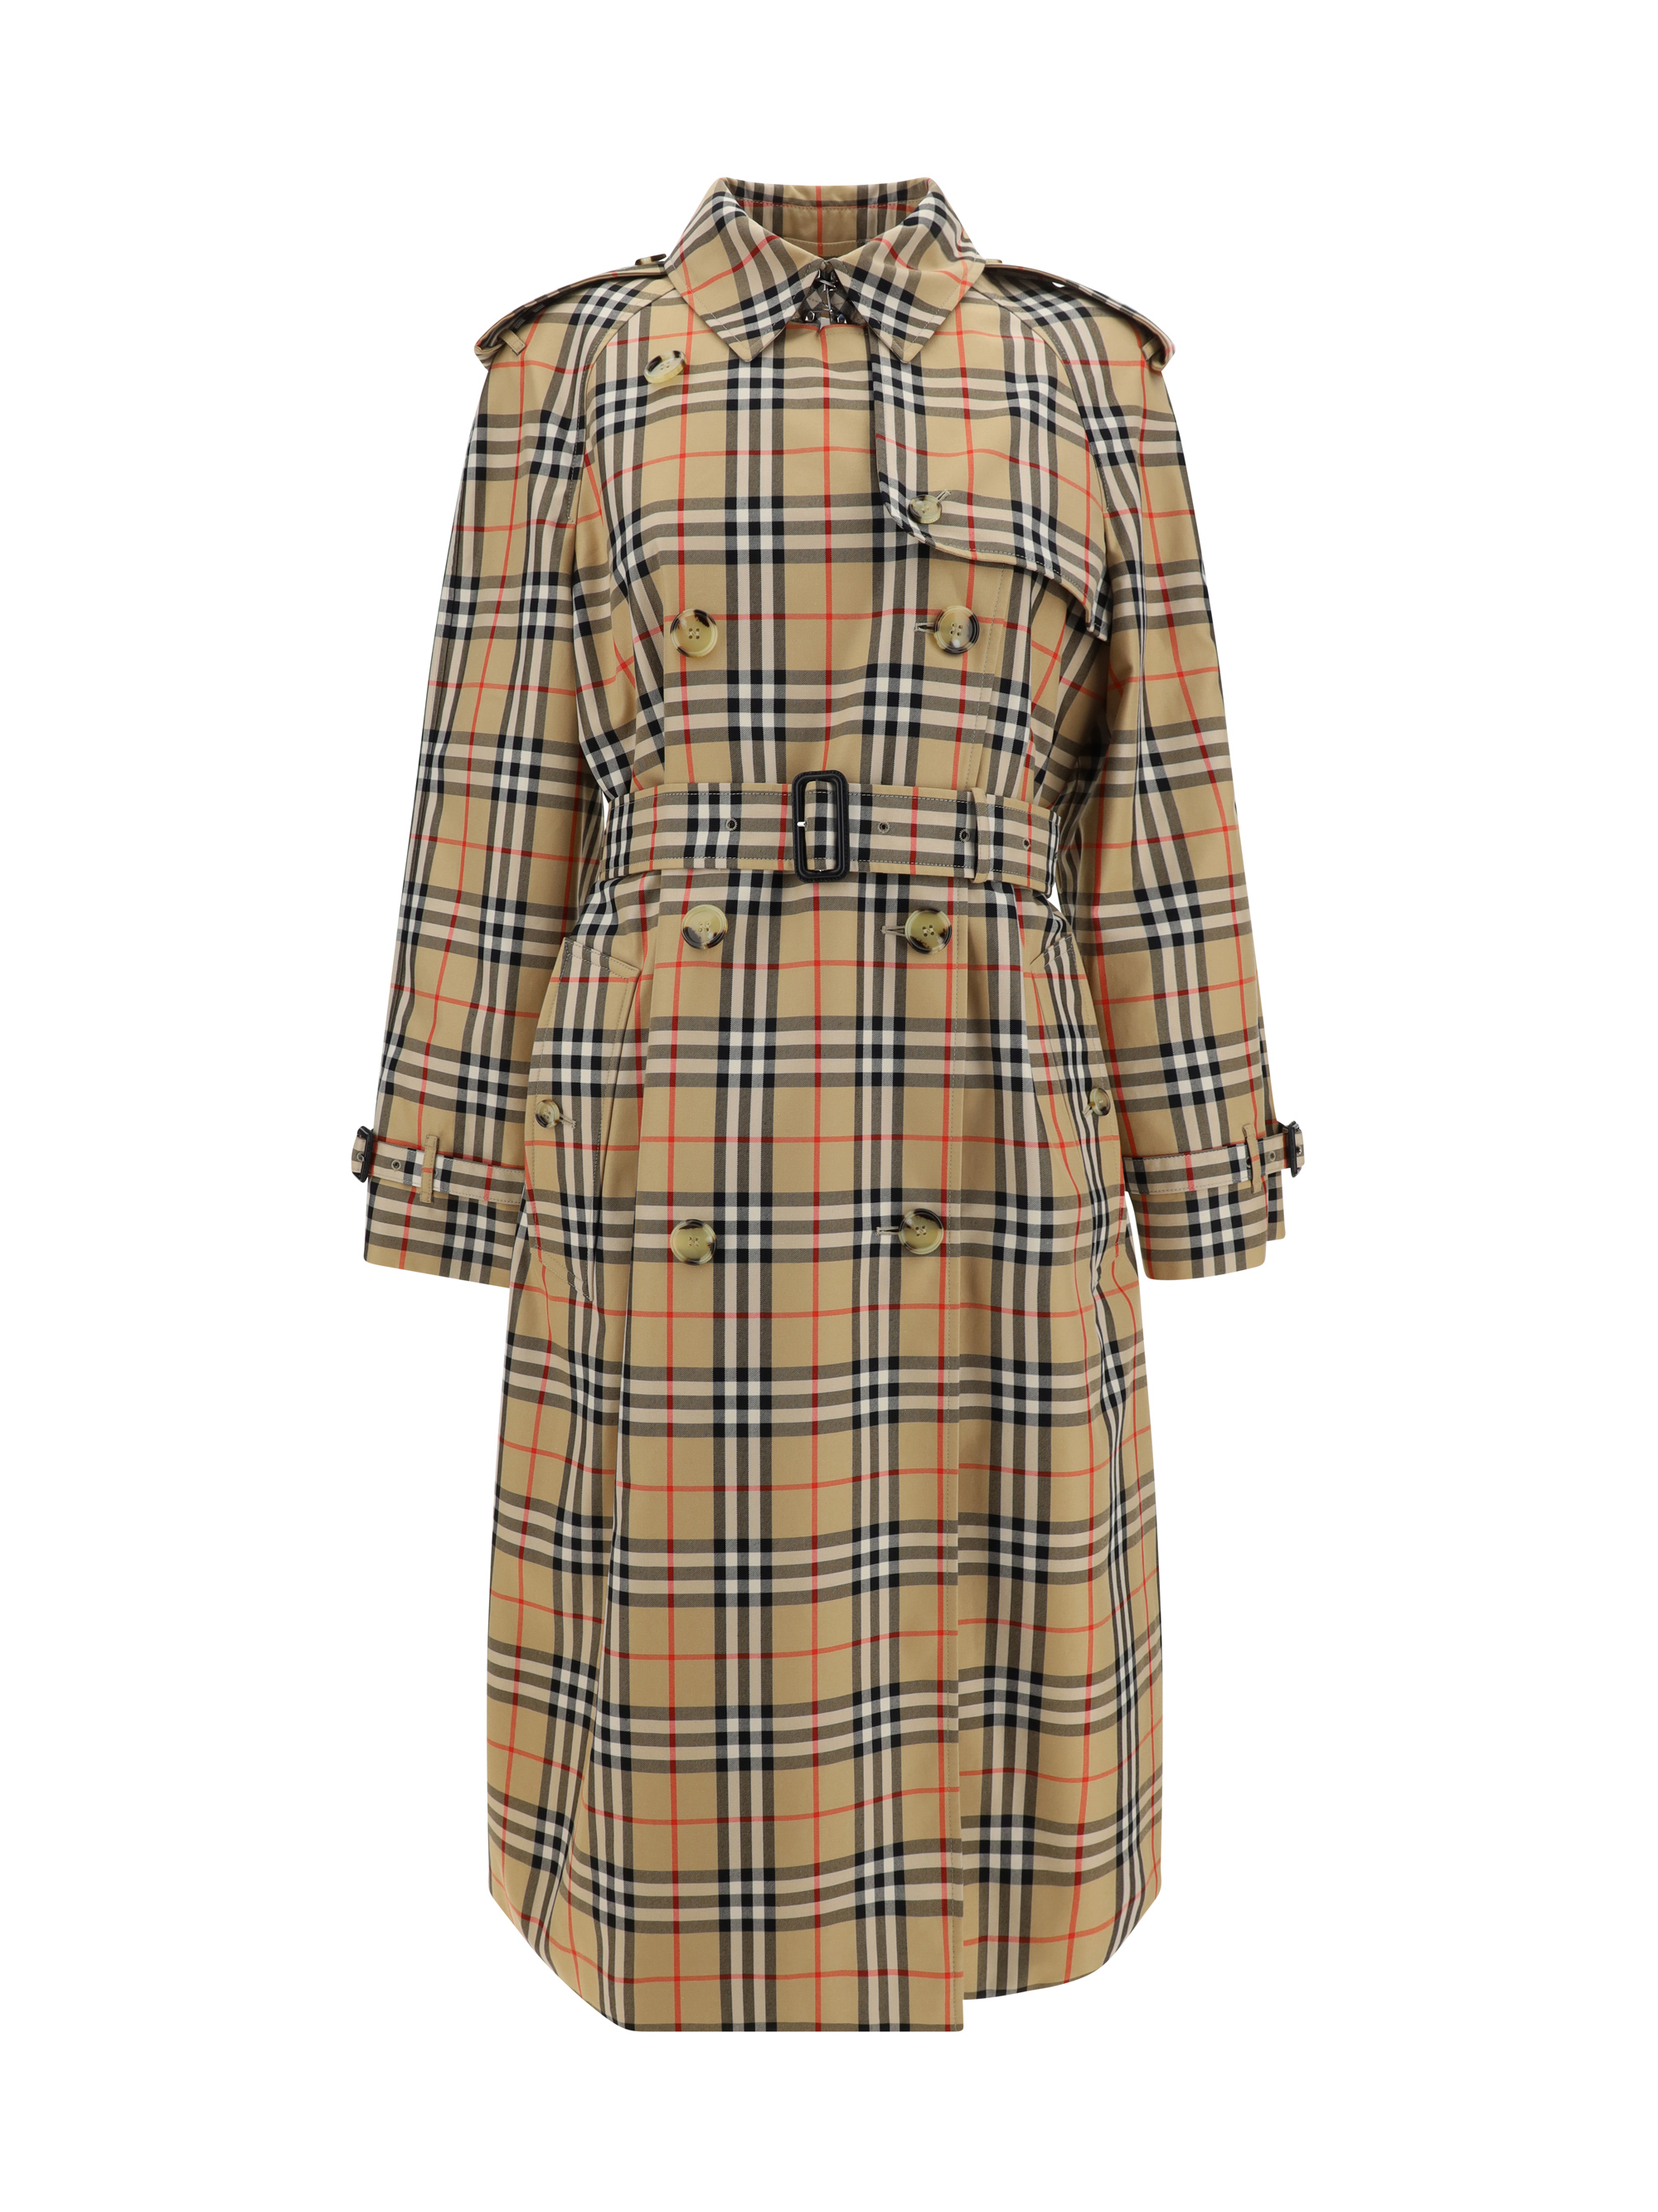 BURBERRY HAREHOPE TRENCH COAT